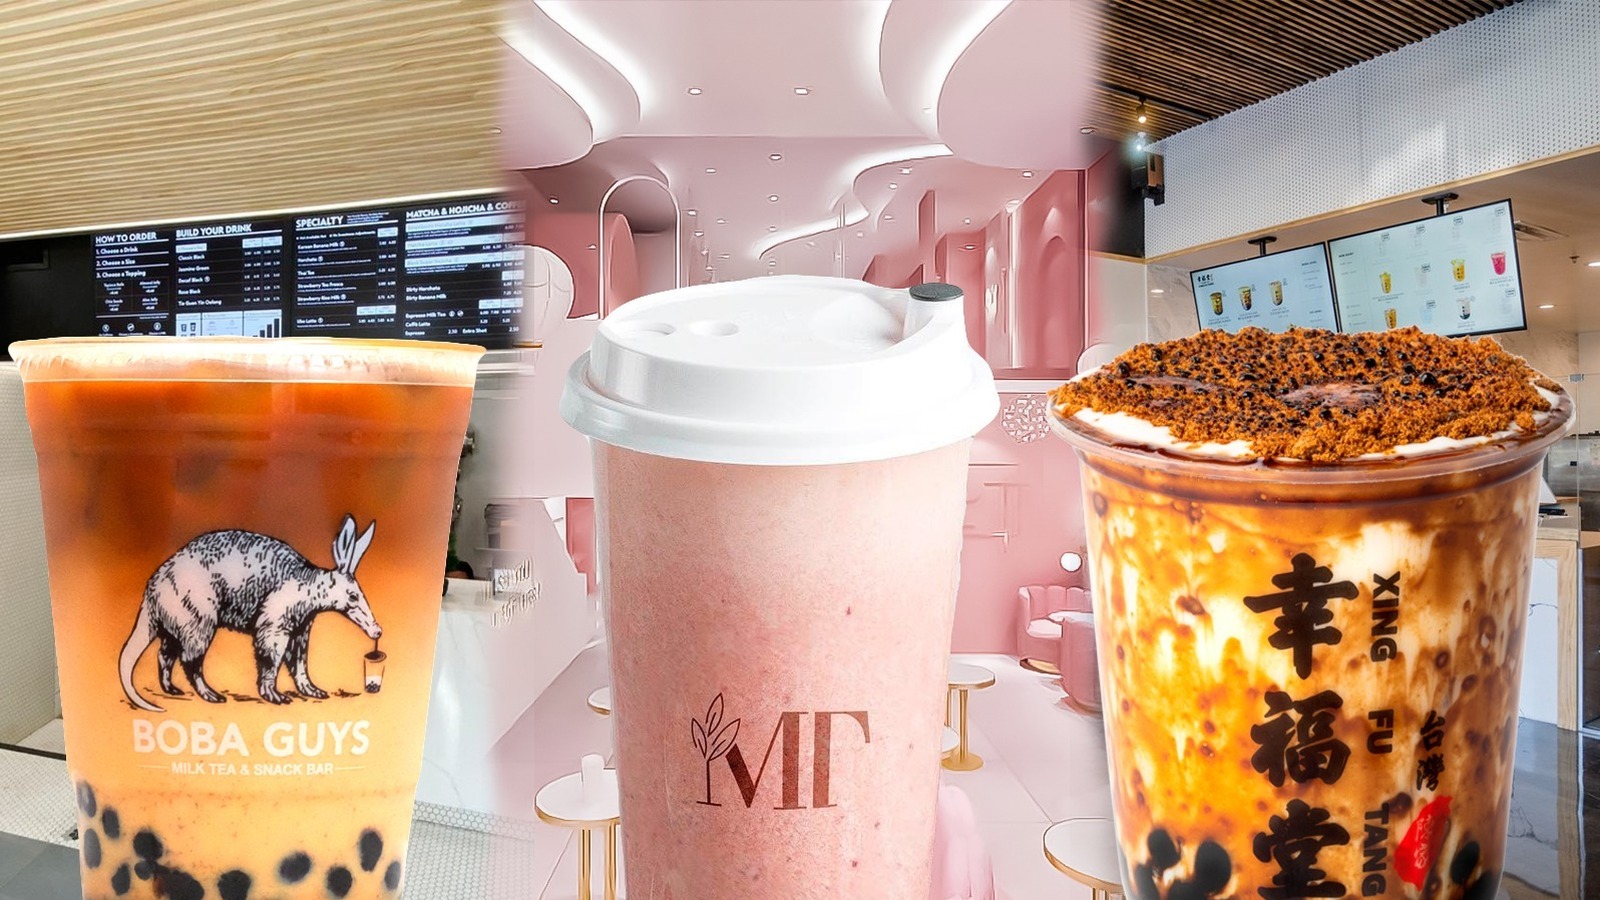 https://www.thedailymeal.com/img/gallery/the-14-best-bubble-tea-cafes-in-nyc/l-intro-1682085057.jpg